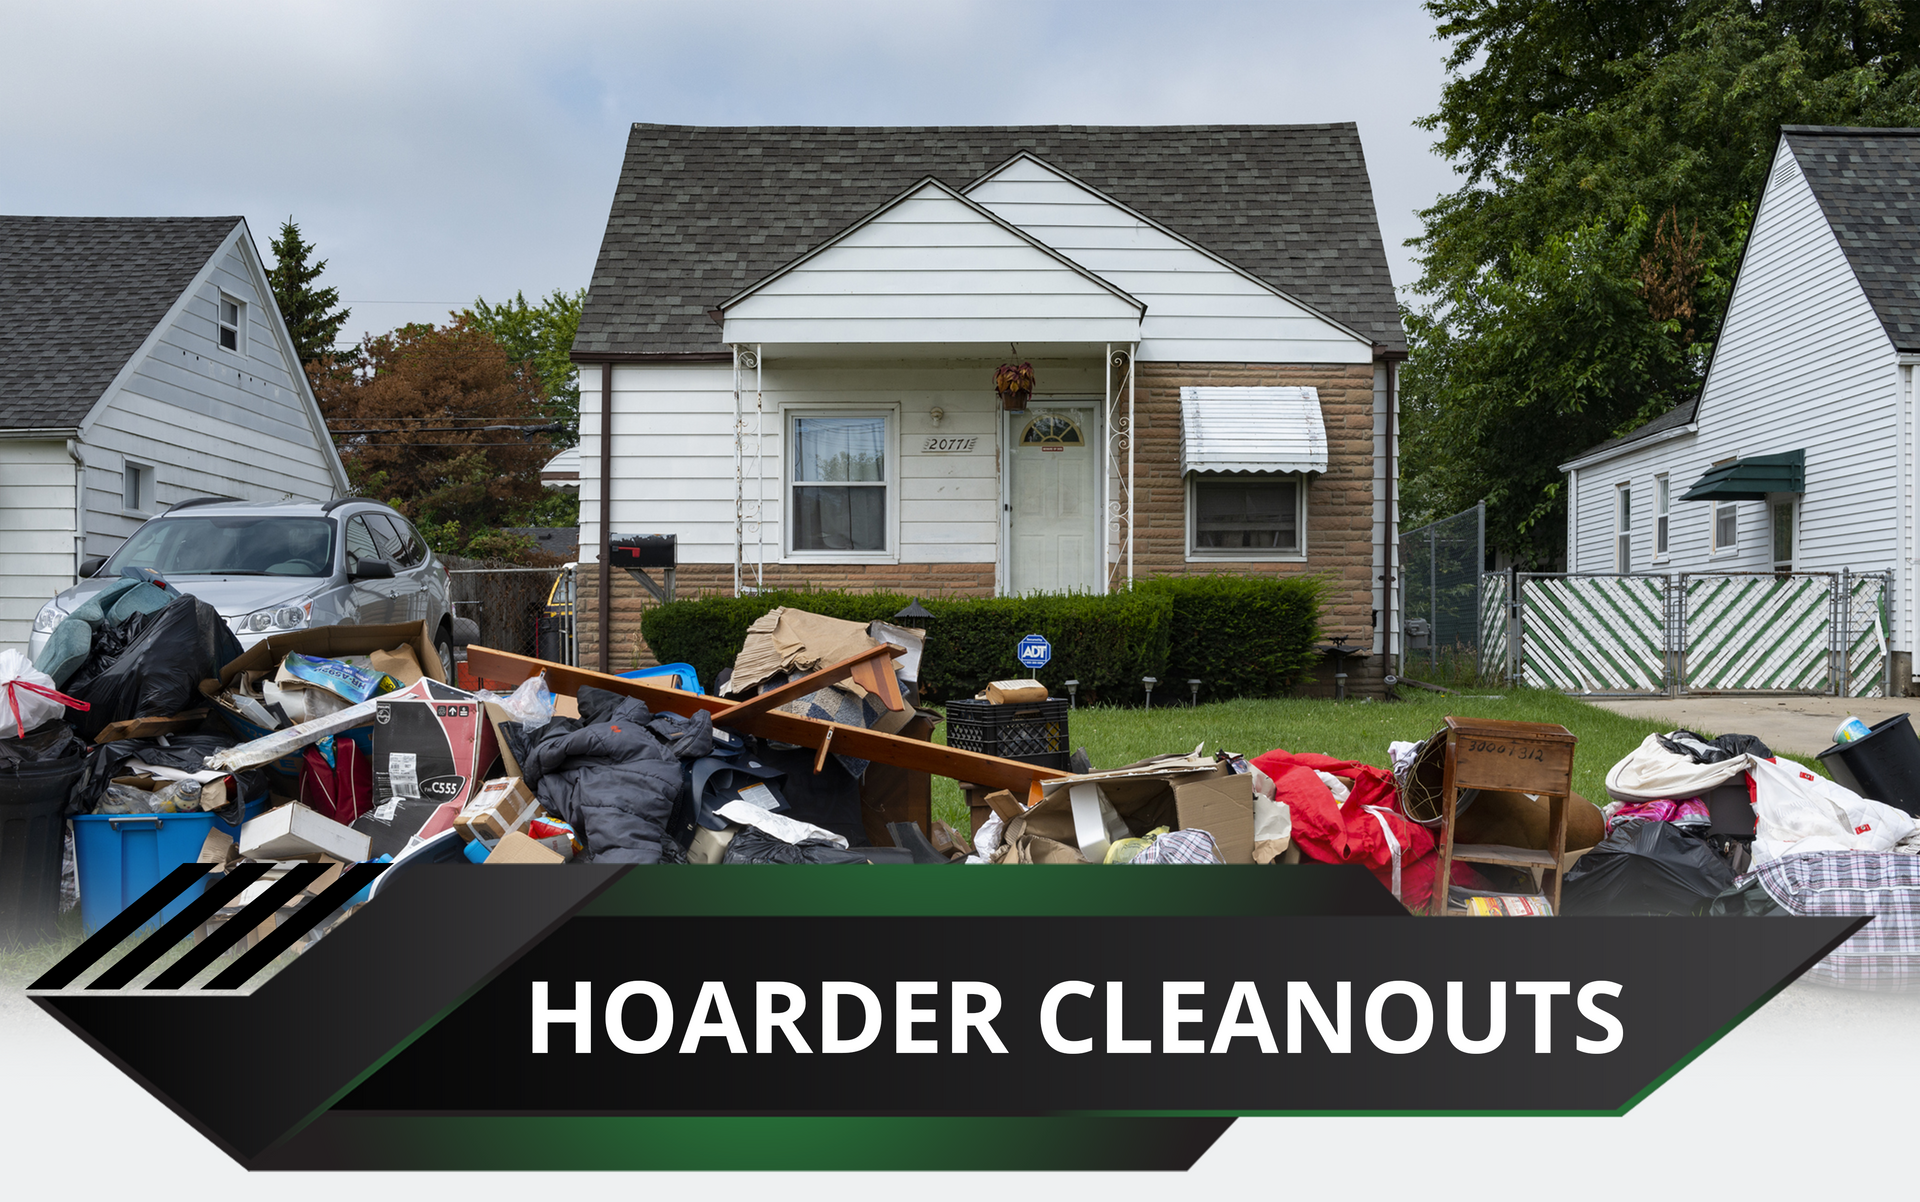 Hoarder Cleanouts in Madera, CA